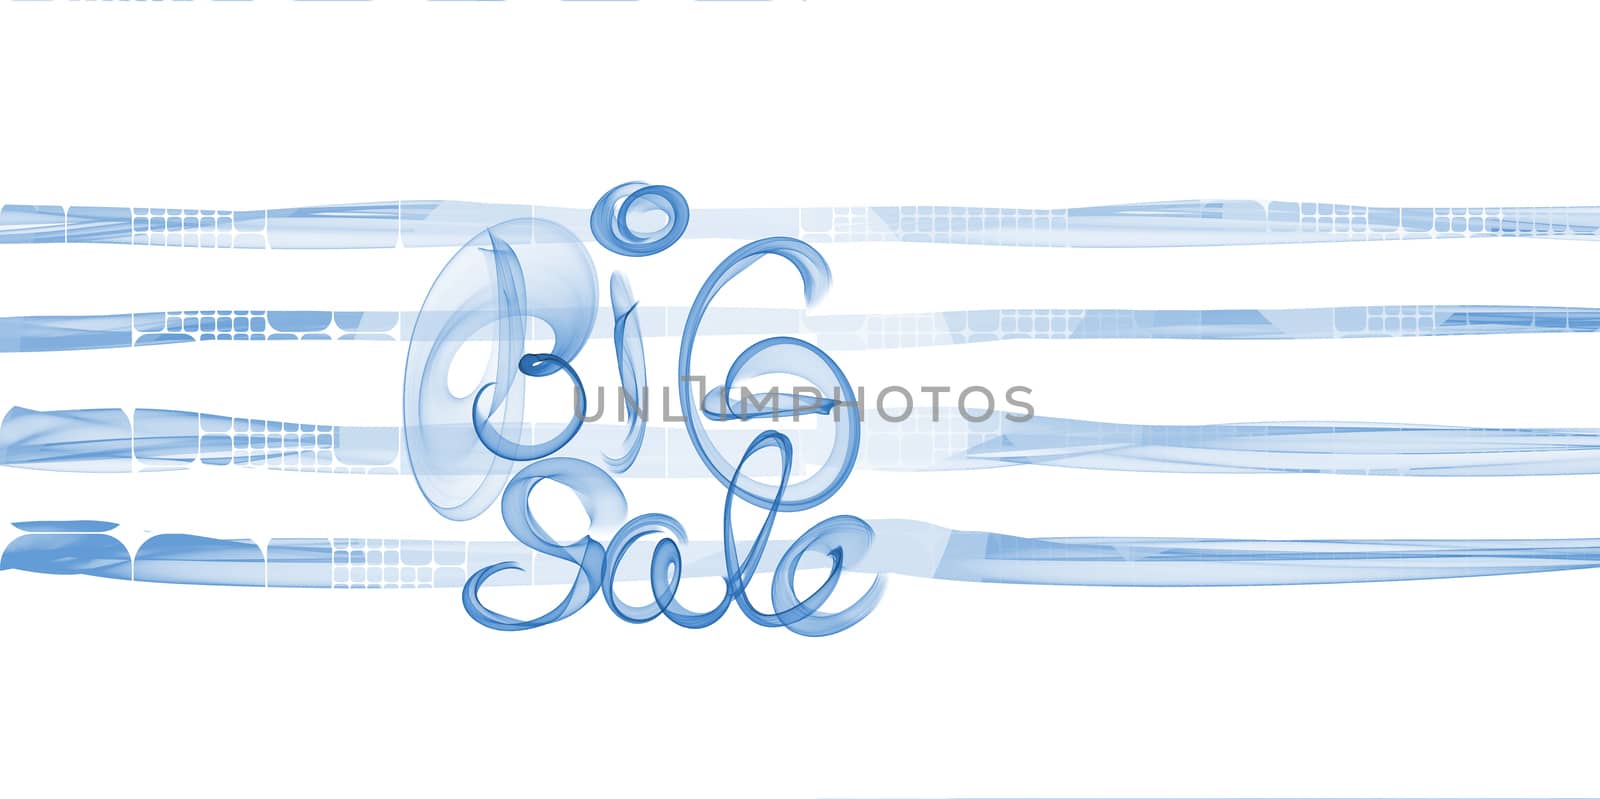 Big sale lettering written with blue smoke or flame on white striped abstract background by skrotov